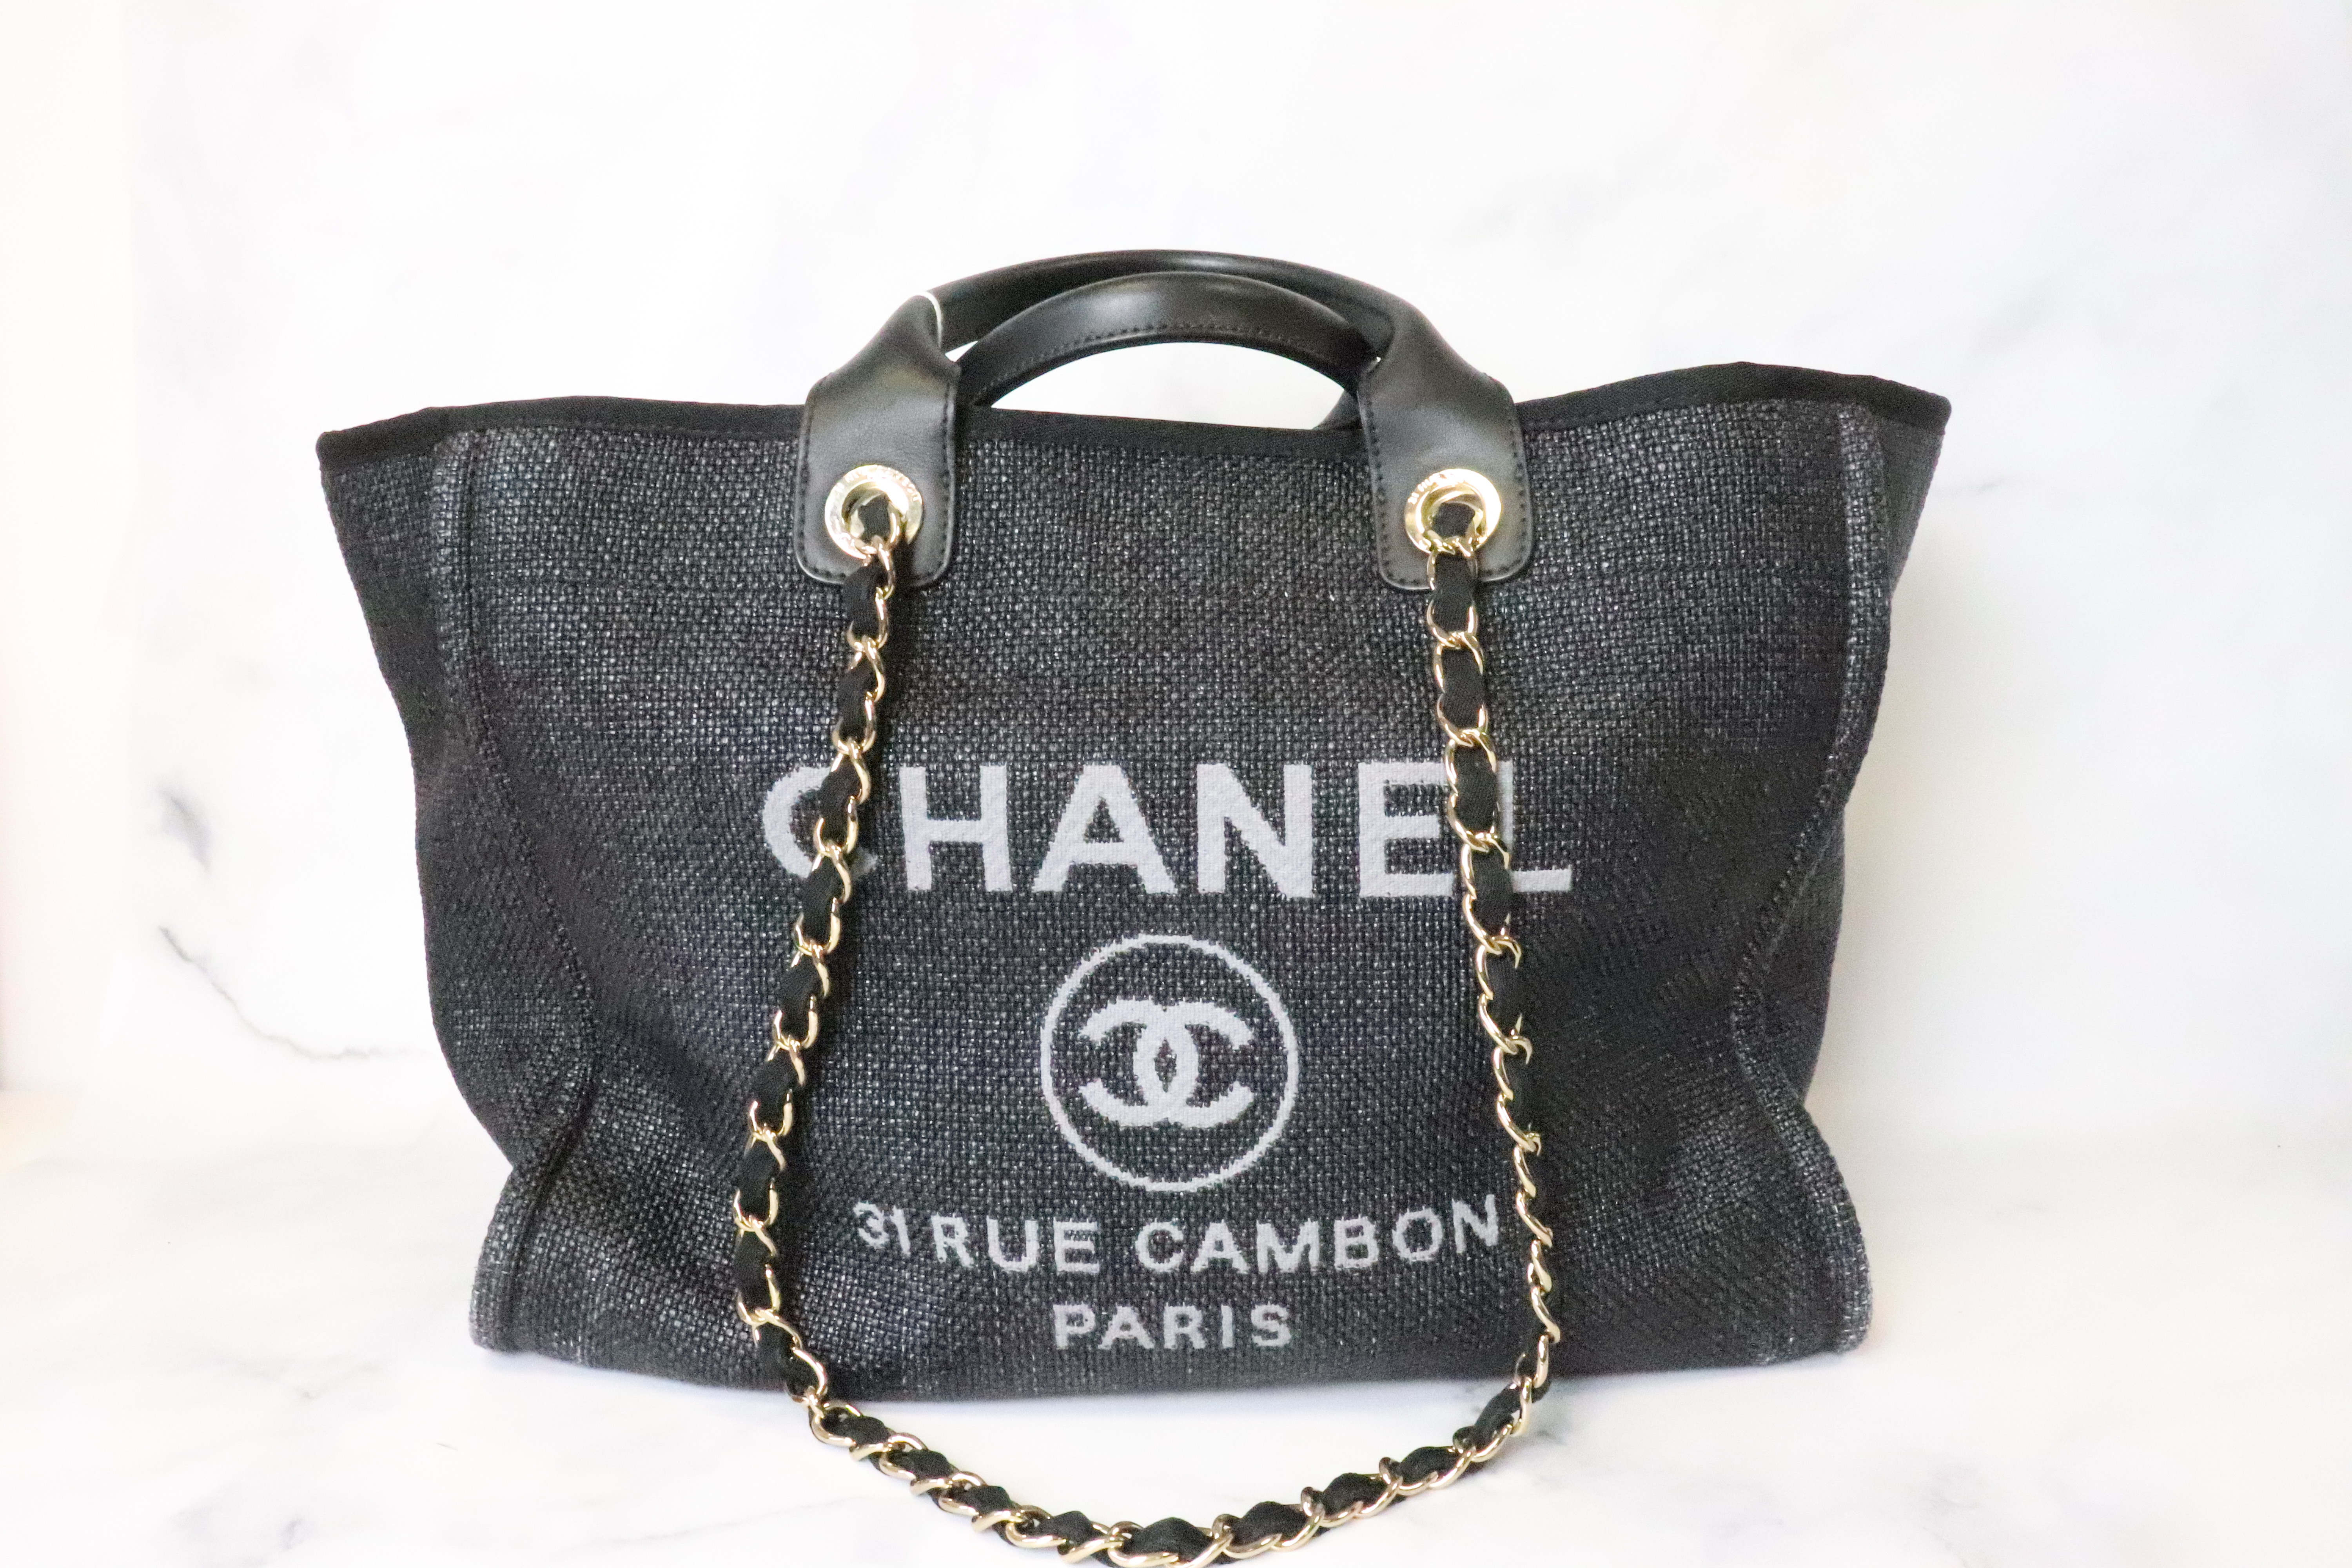 Chanel Deauville Large, Navy Raffia, Preowned in Dustbag - Julia Rose Boston